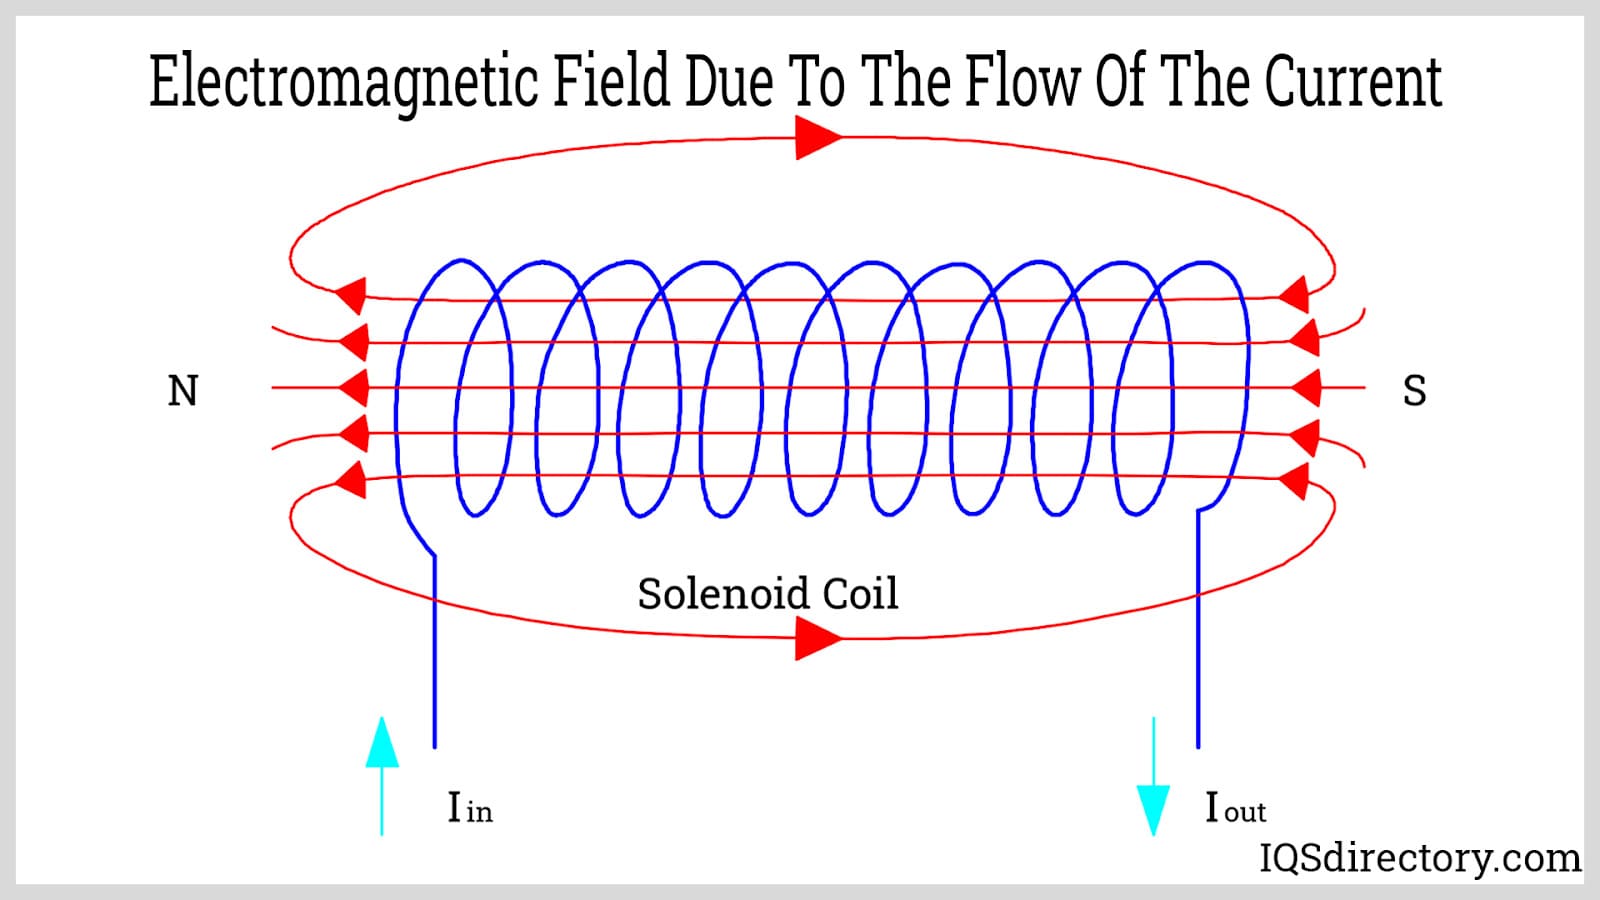 https://www.iqsdirectory.com/articles/electric-coil/solenoid-coils/electromagnetic-field-due-to-pthe-flow-of-the-current.jpg